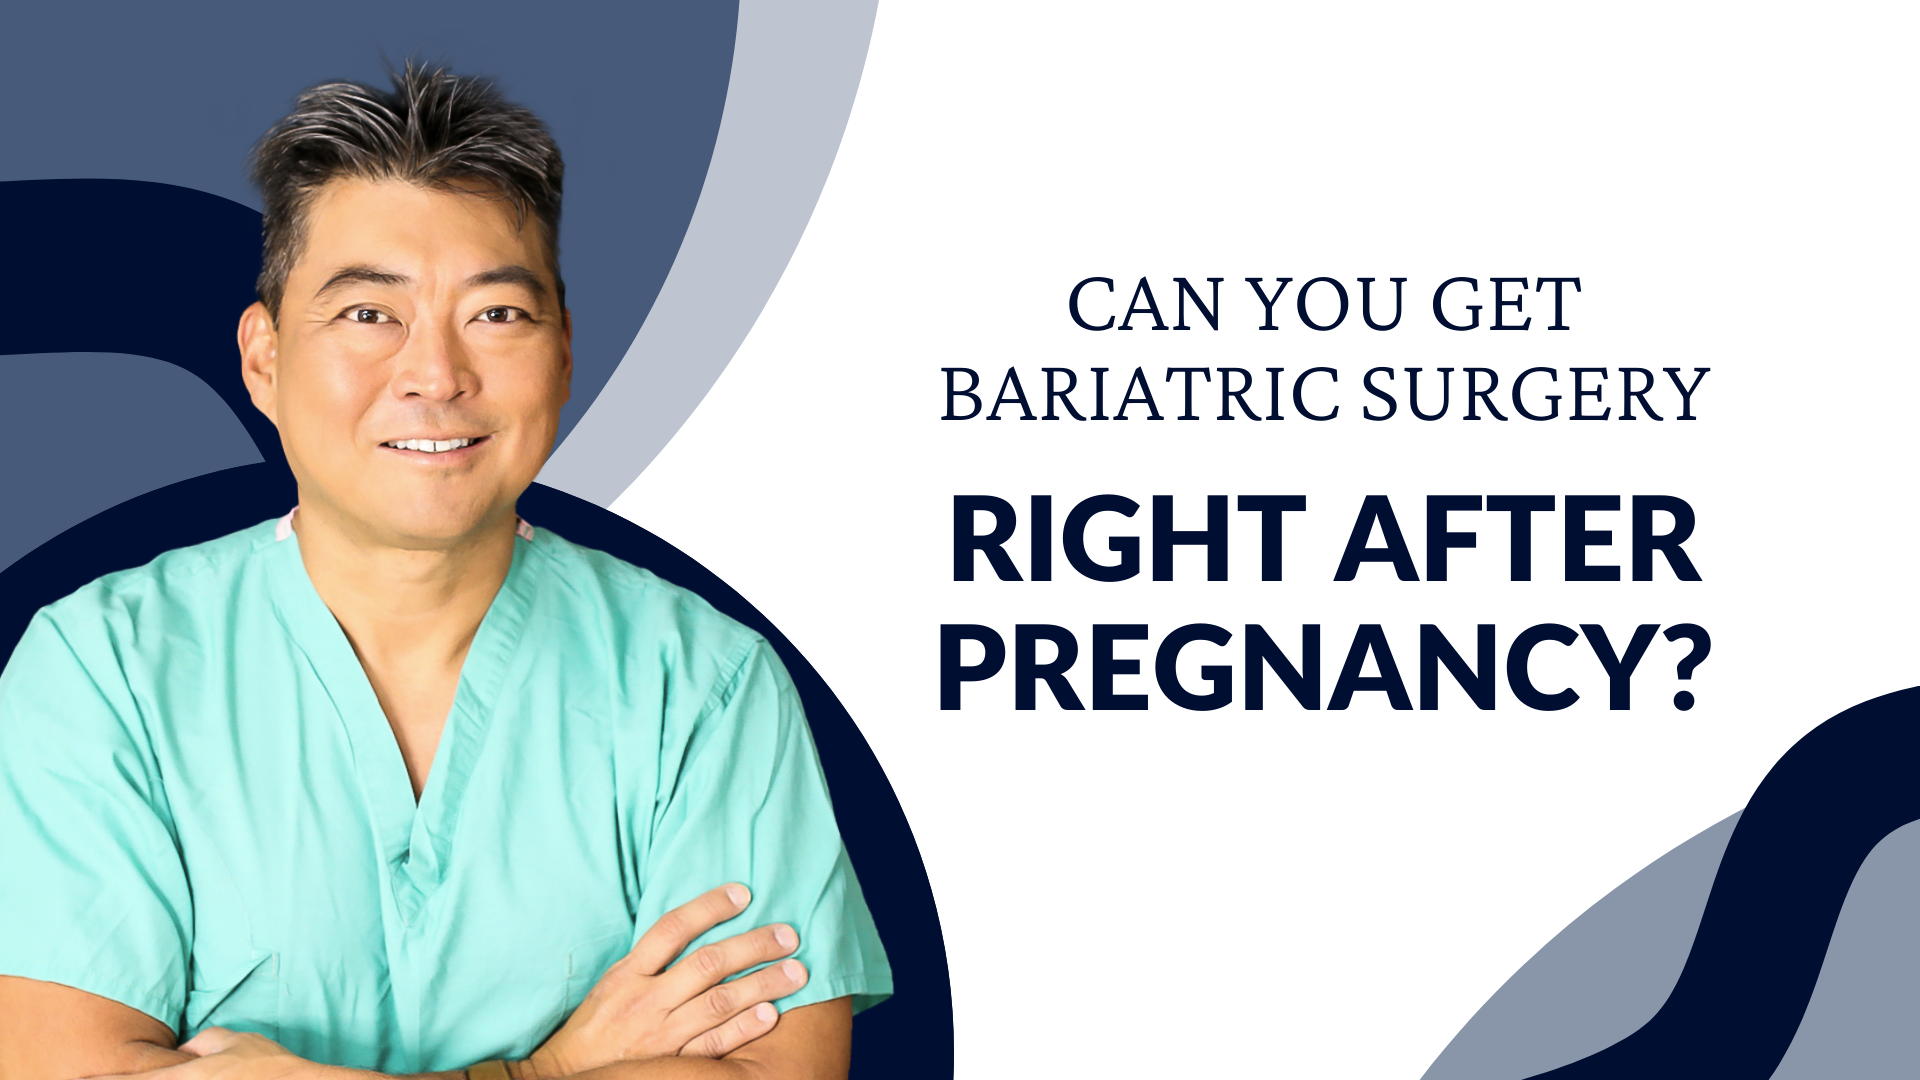 Can You Get Bariatric Surgery After Pregnancy